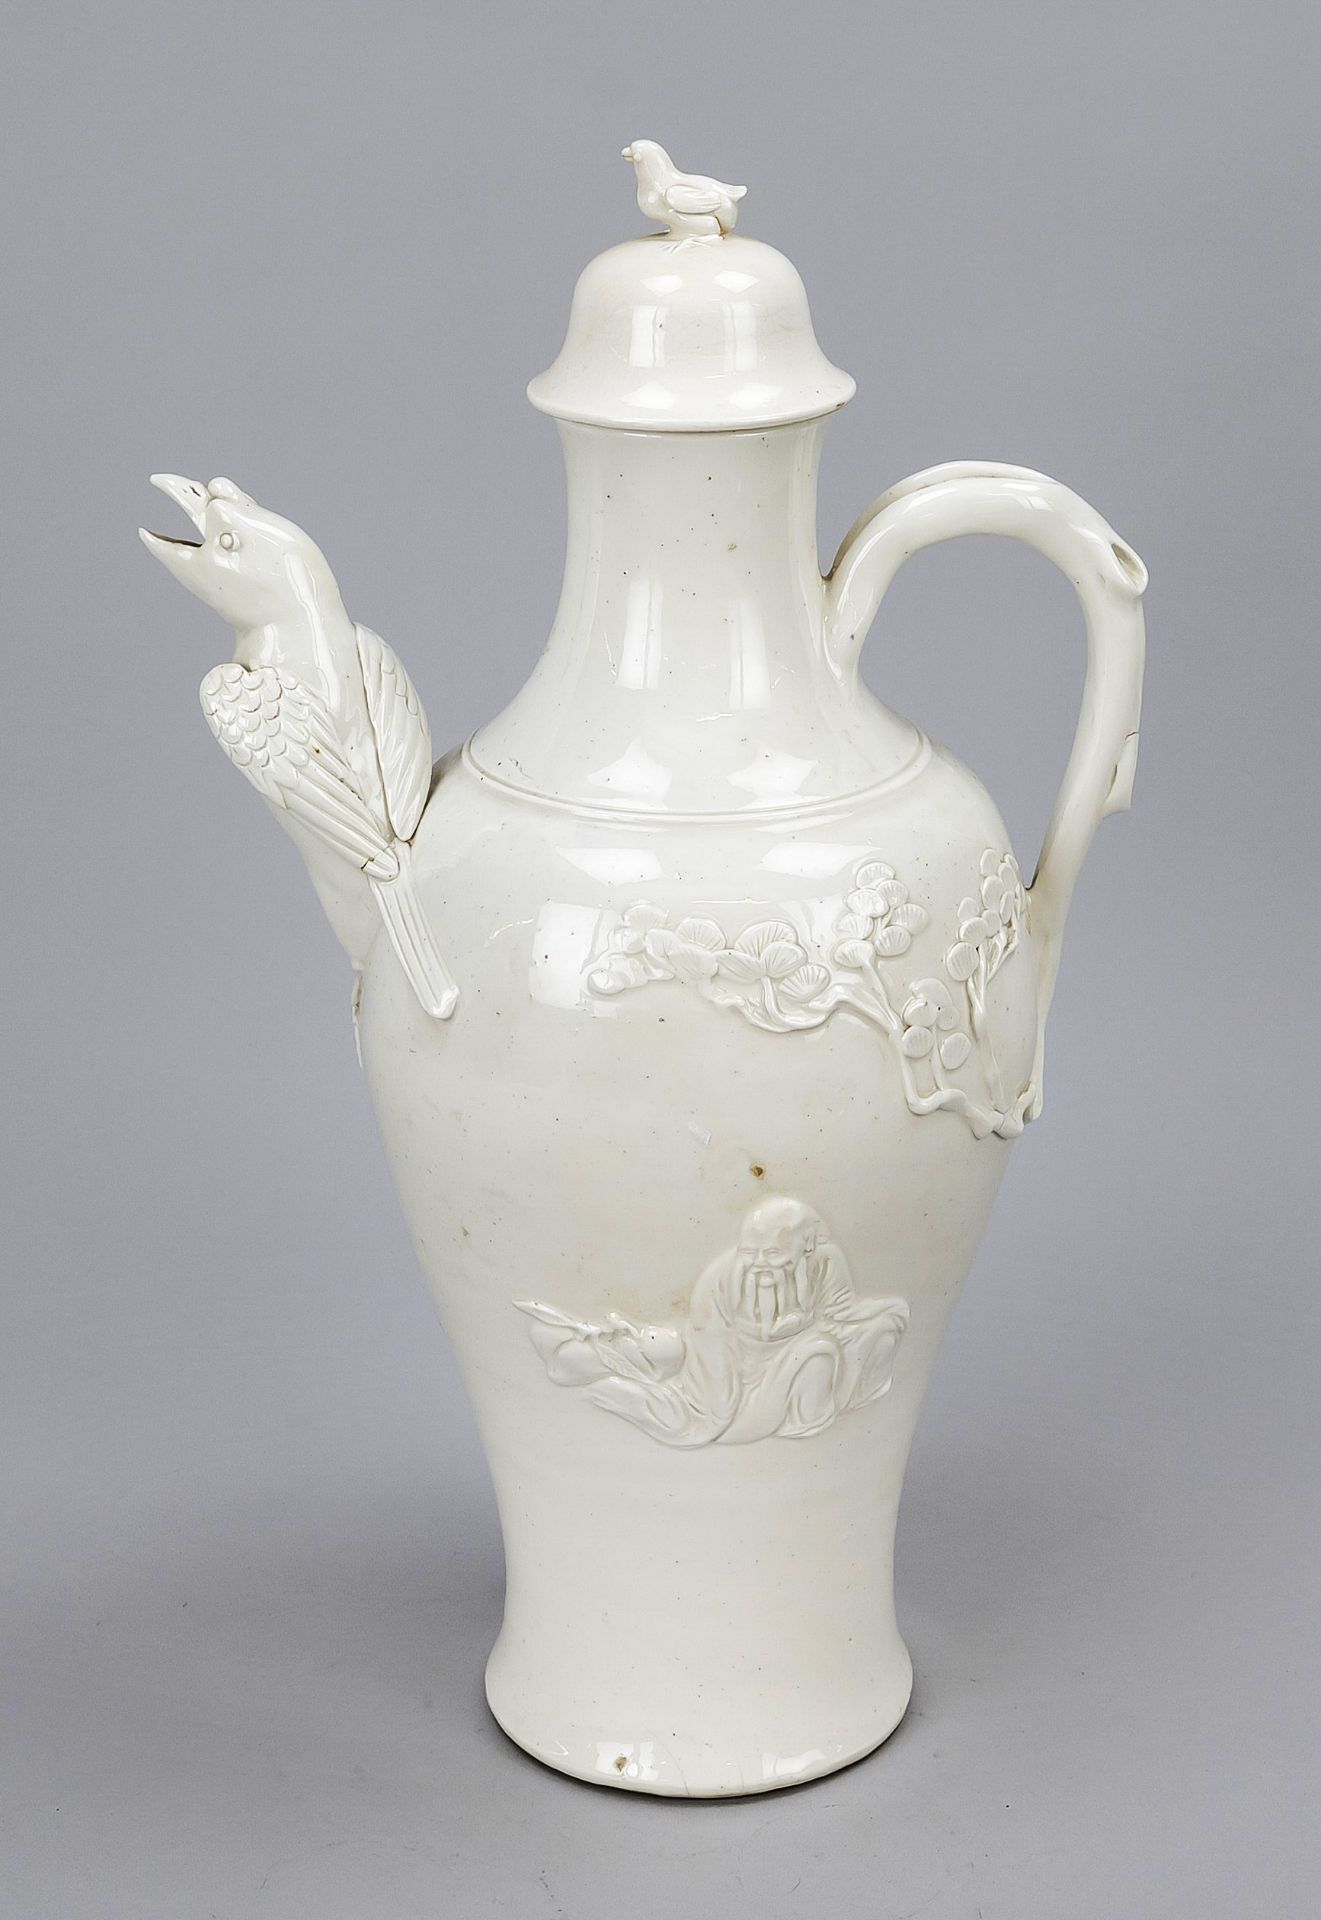 Blanc de Chine teapot, China (Dehua) 19th/20th century Slender body with relief decoration, loop